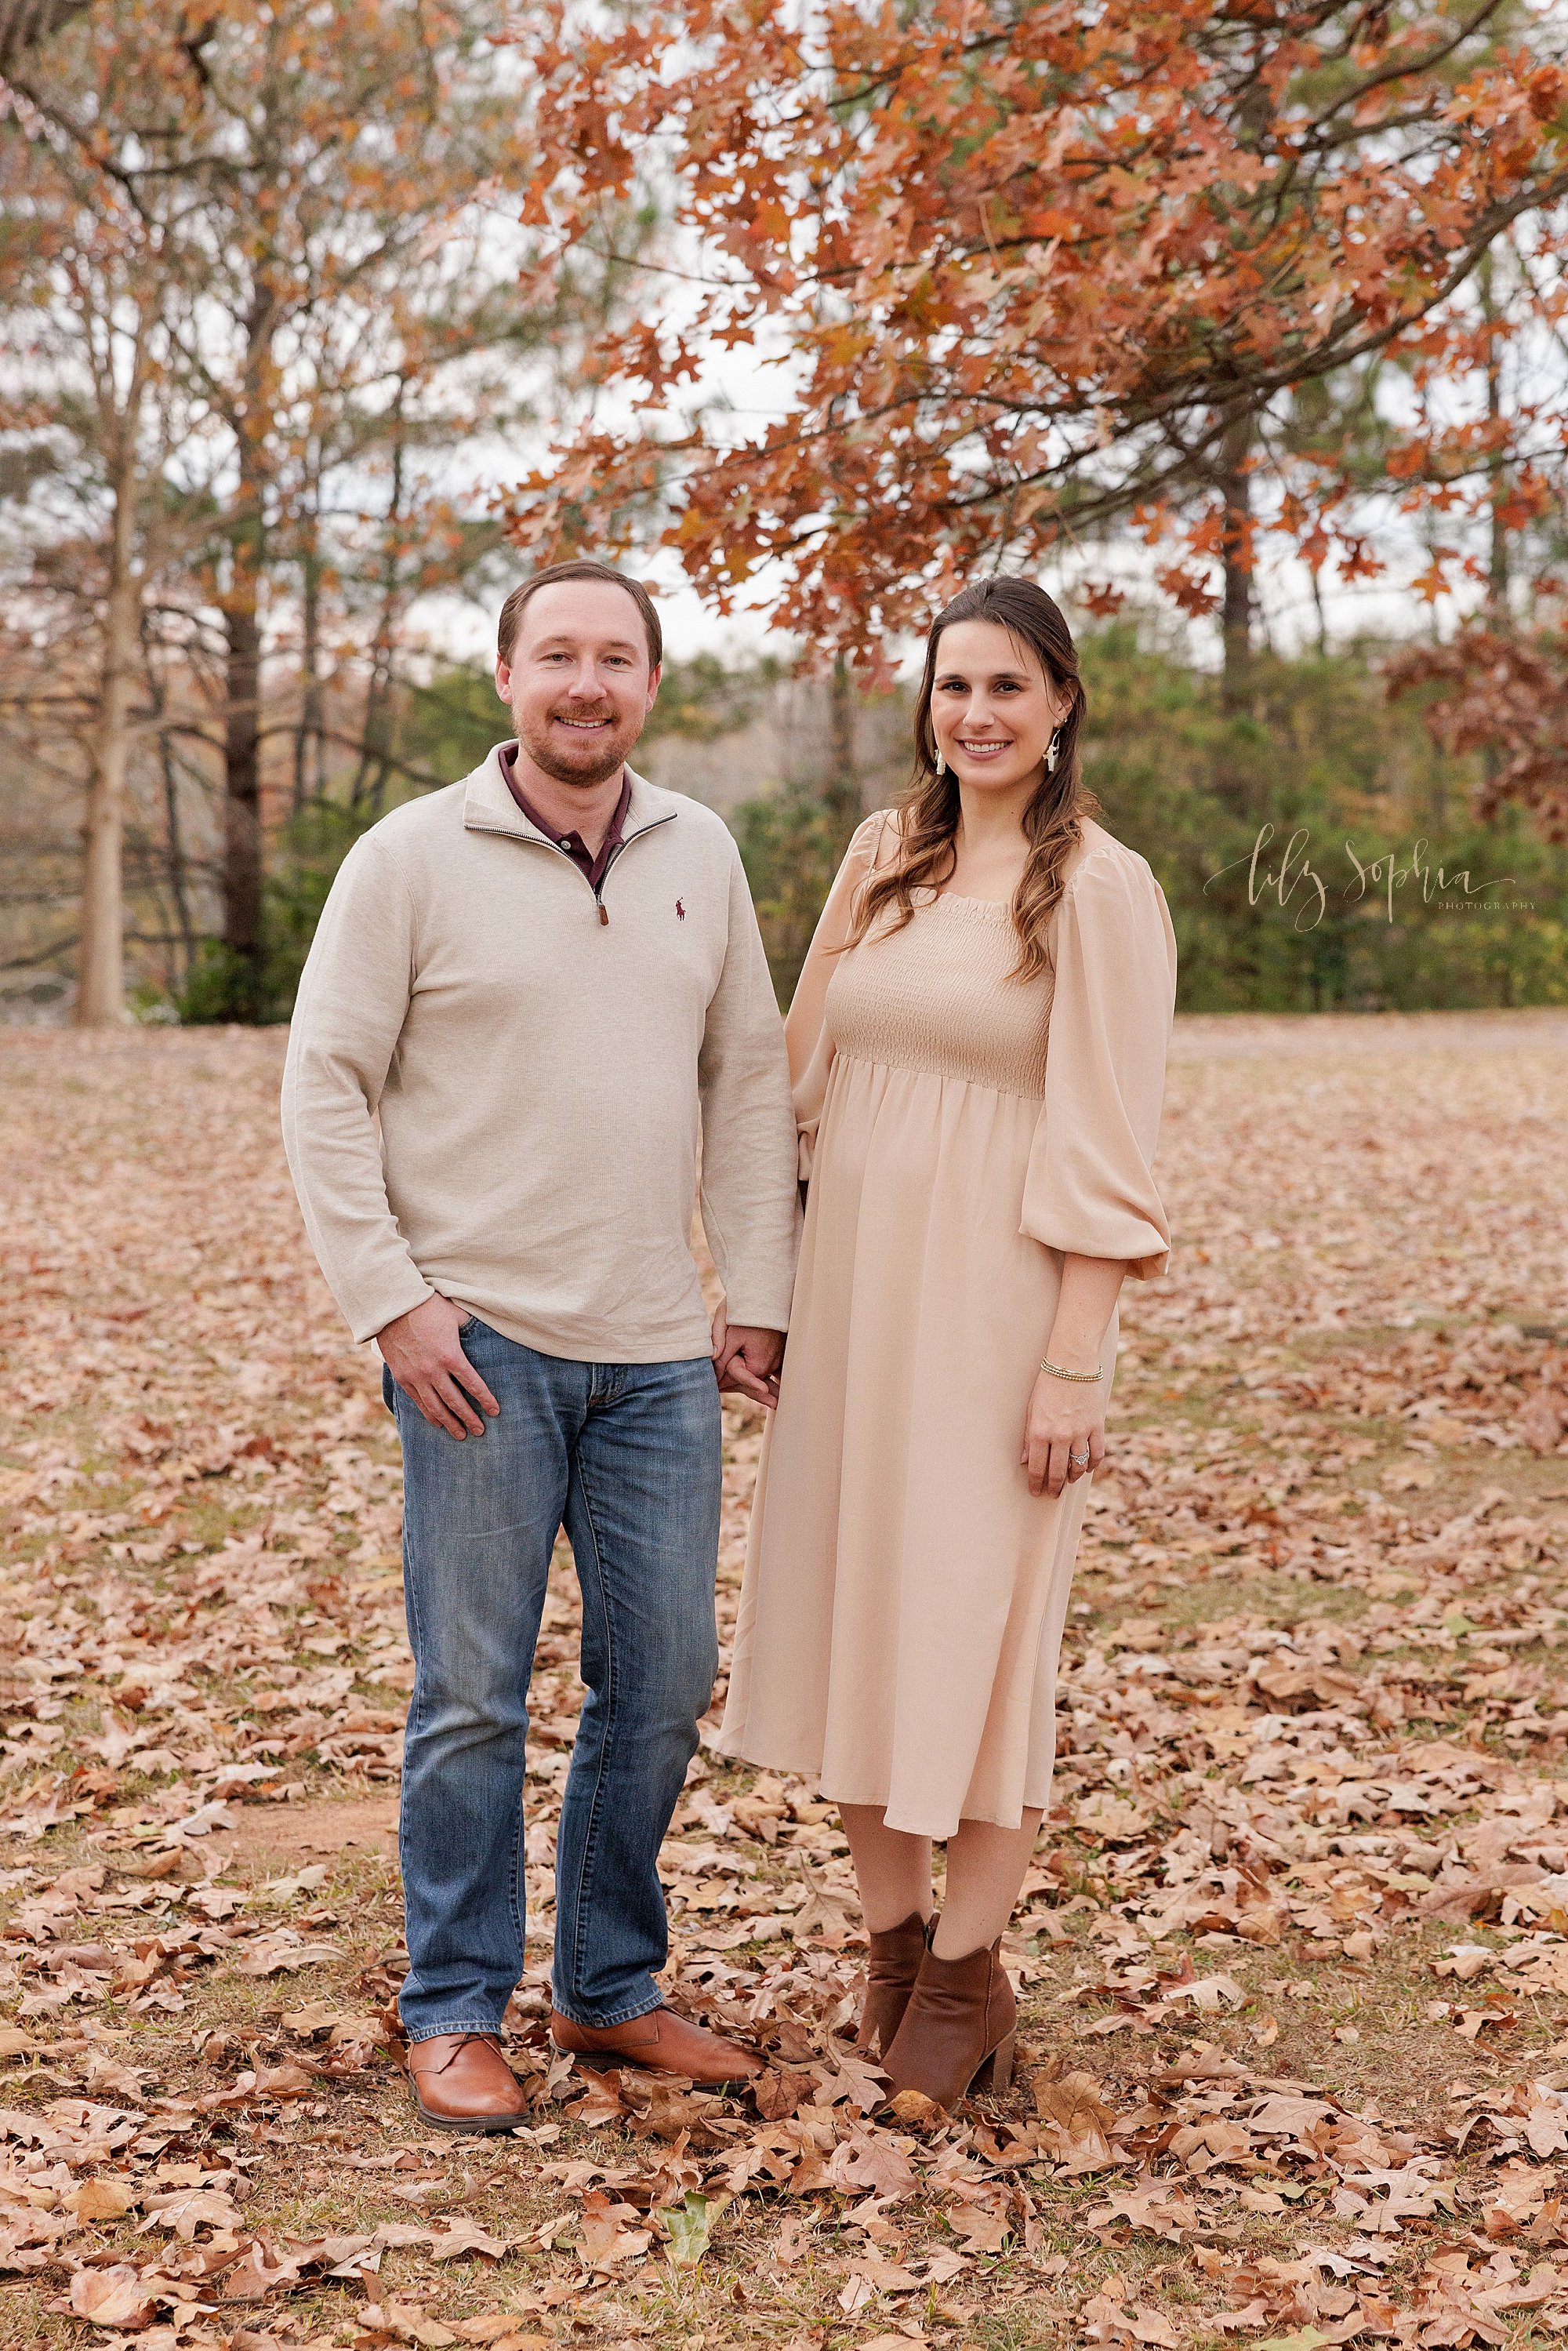 intown-atlanta-morningside-decatur-brookhaven-buckhead-outdoor-couples-maternity-fall-photoshoot-daschunds-doxies-gender-reveal_6191.jpg